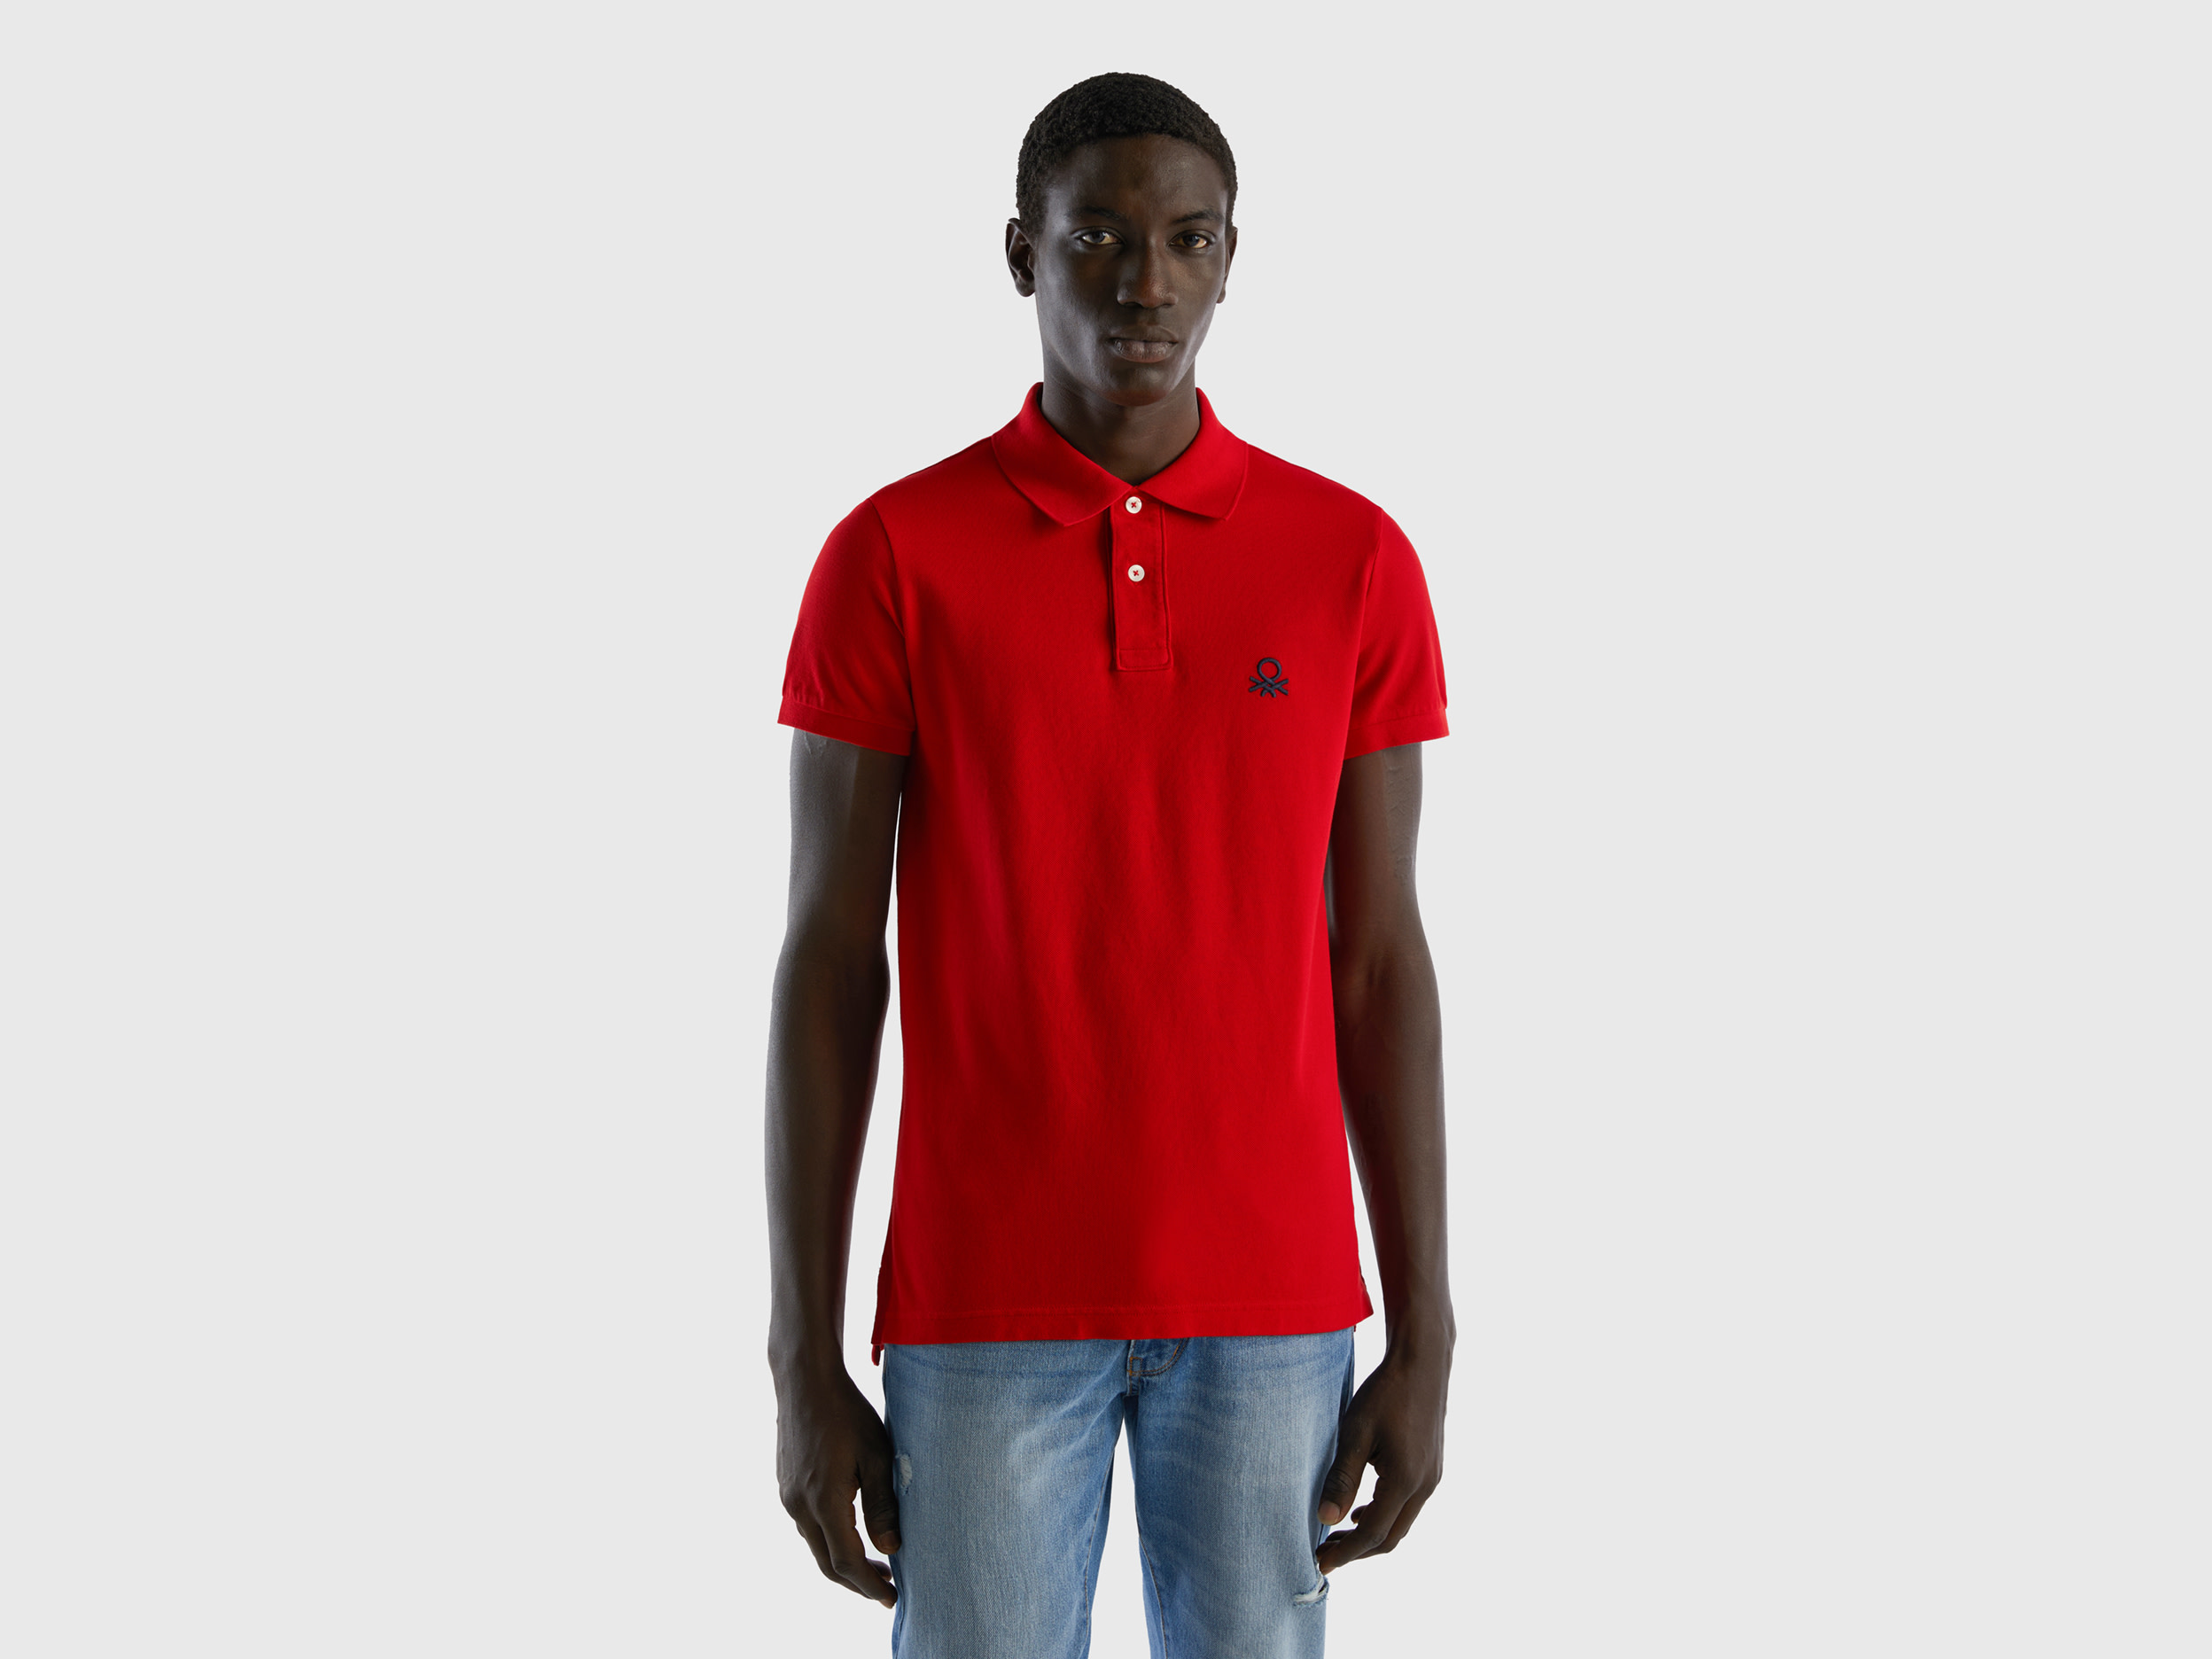 Image of Benetton, Red Slim Fit Polo, size XXXL, Red, Men